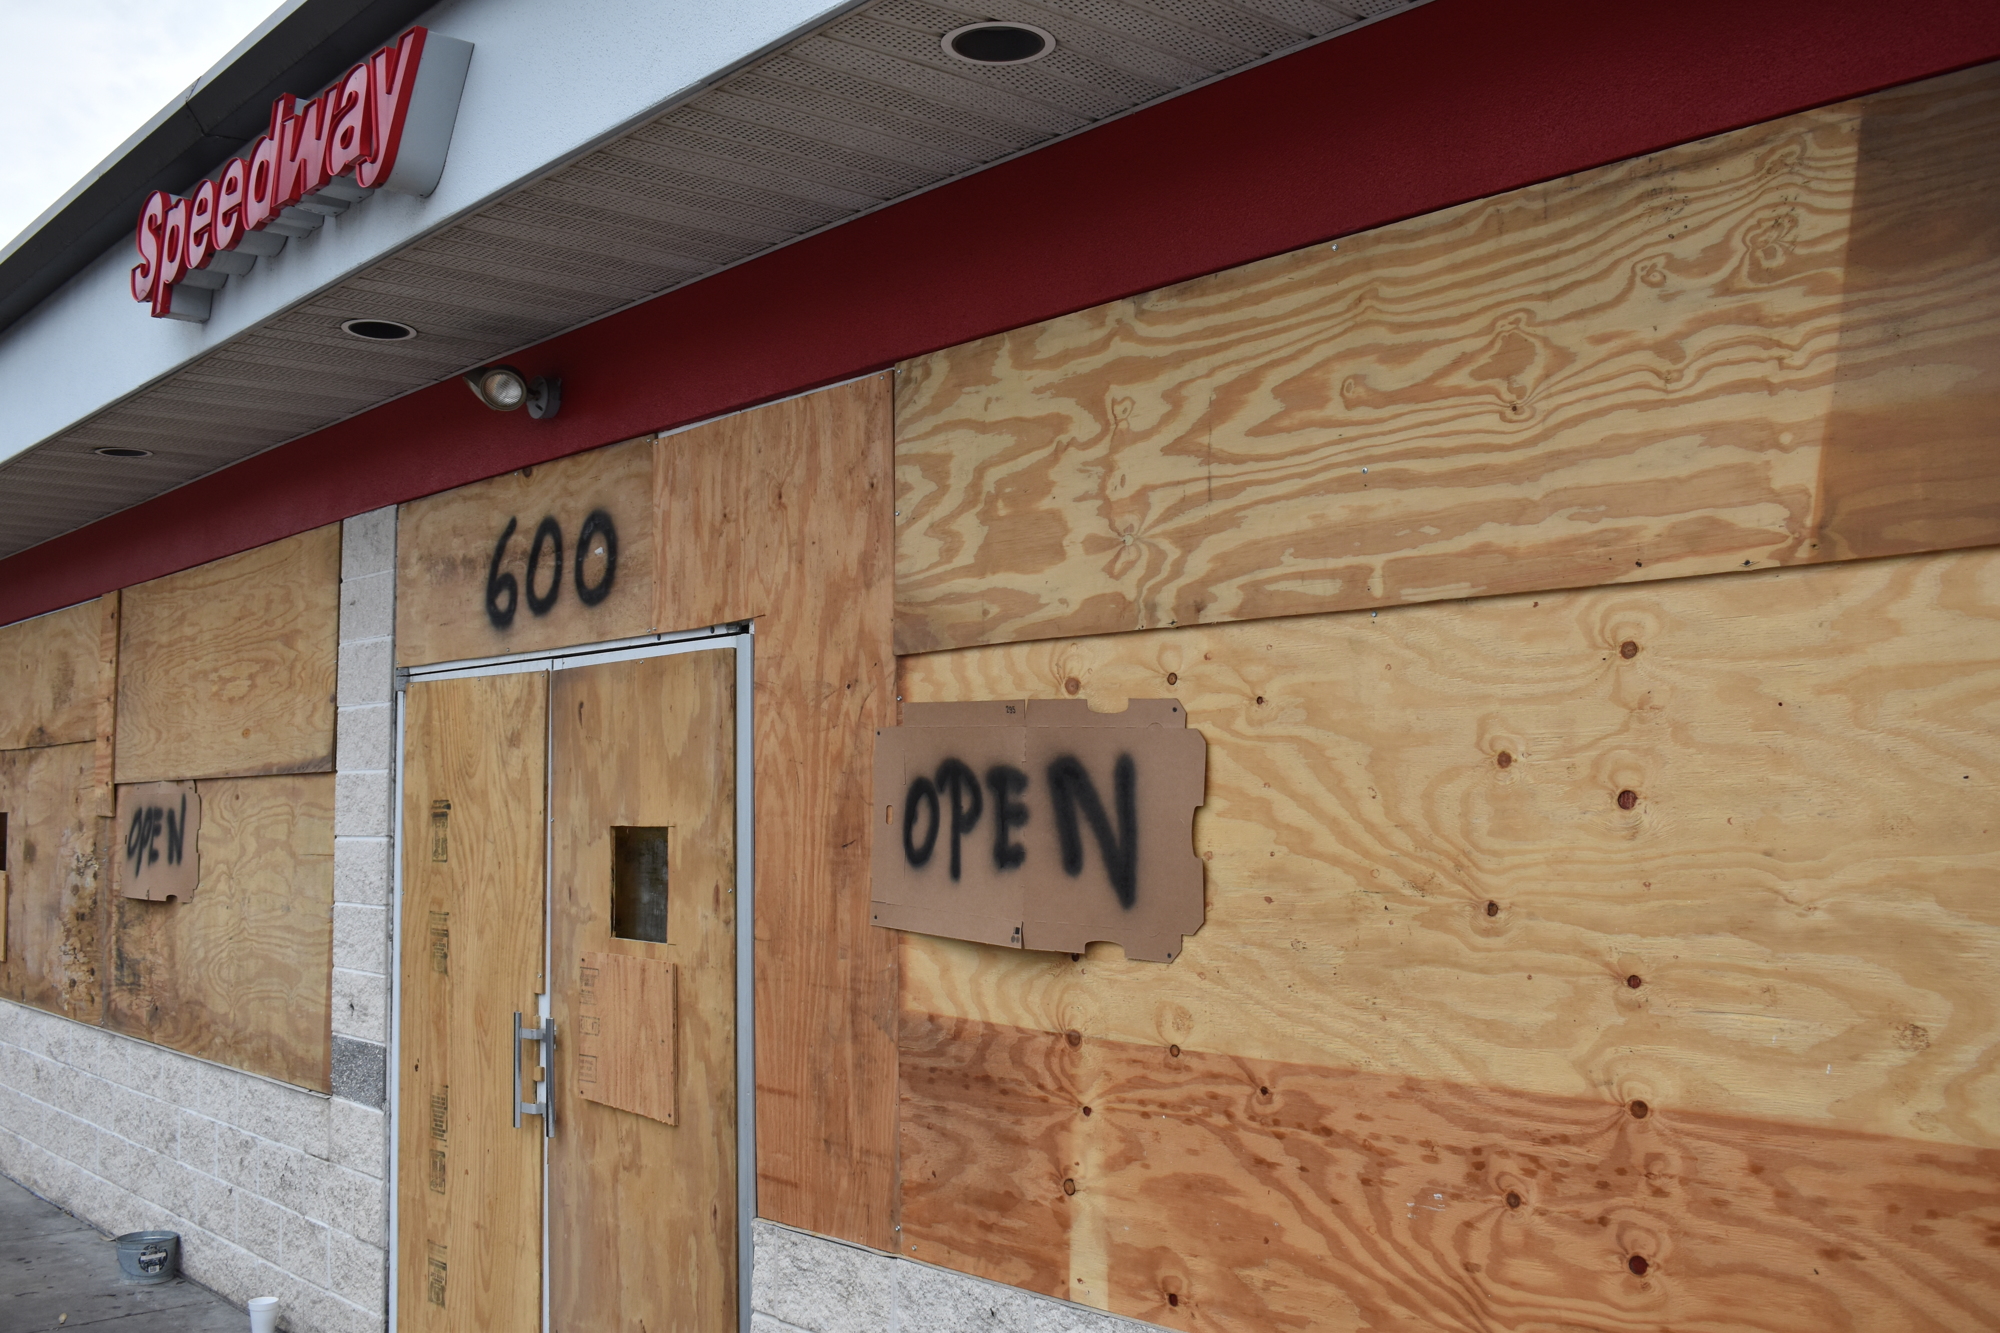 A convenience store on U.S. 301 near downtown was boarded up but remained open.